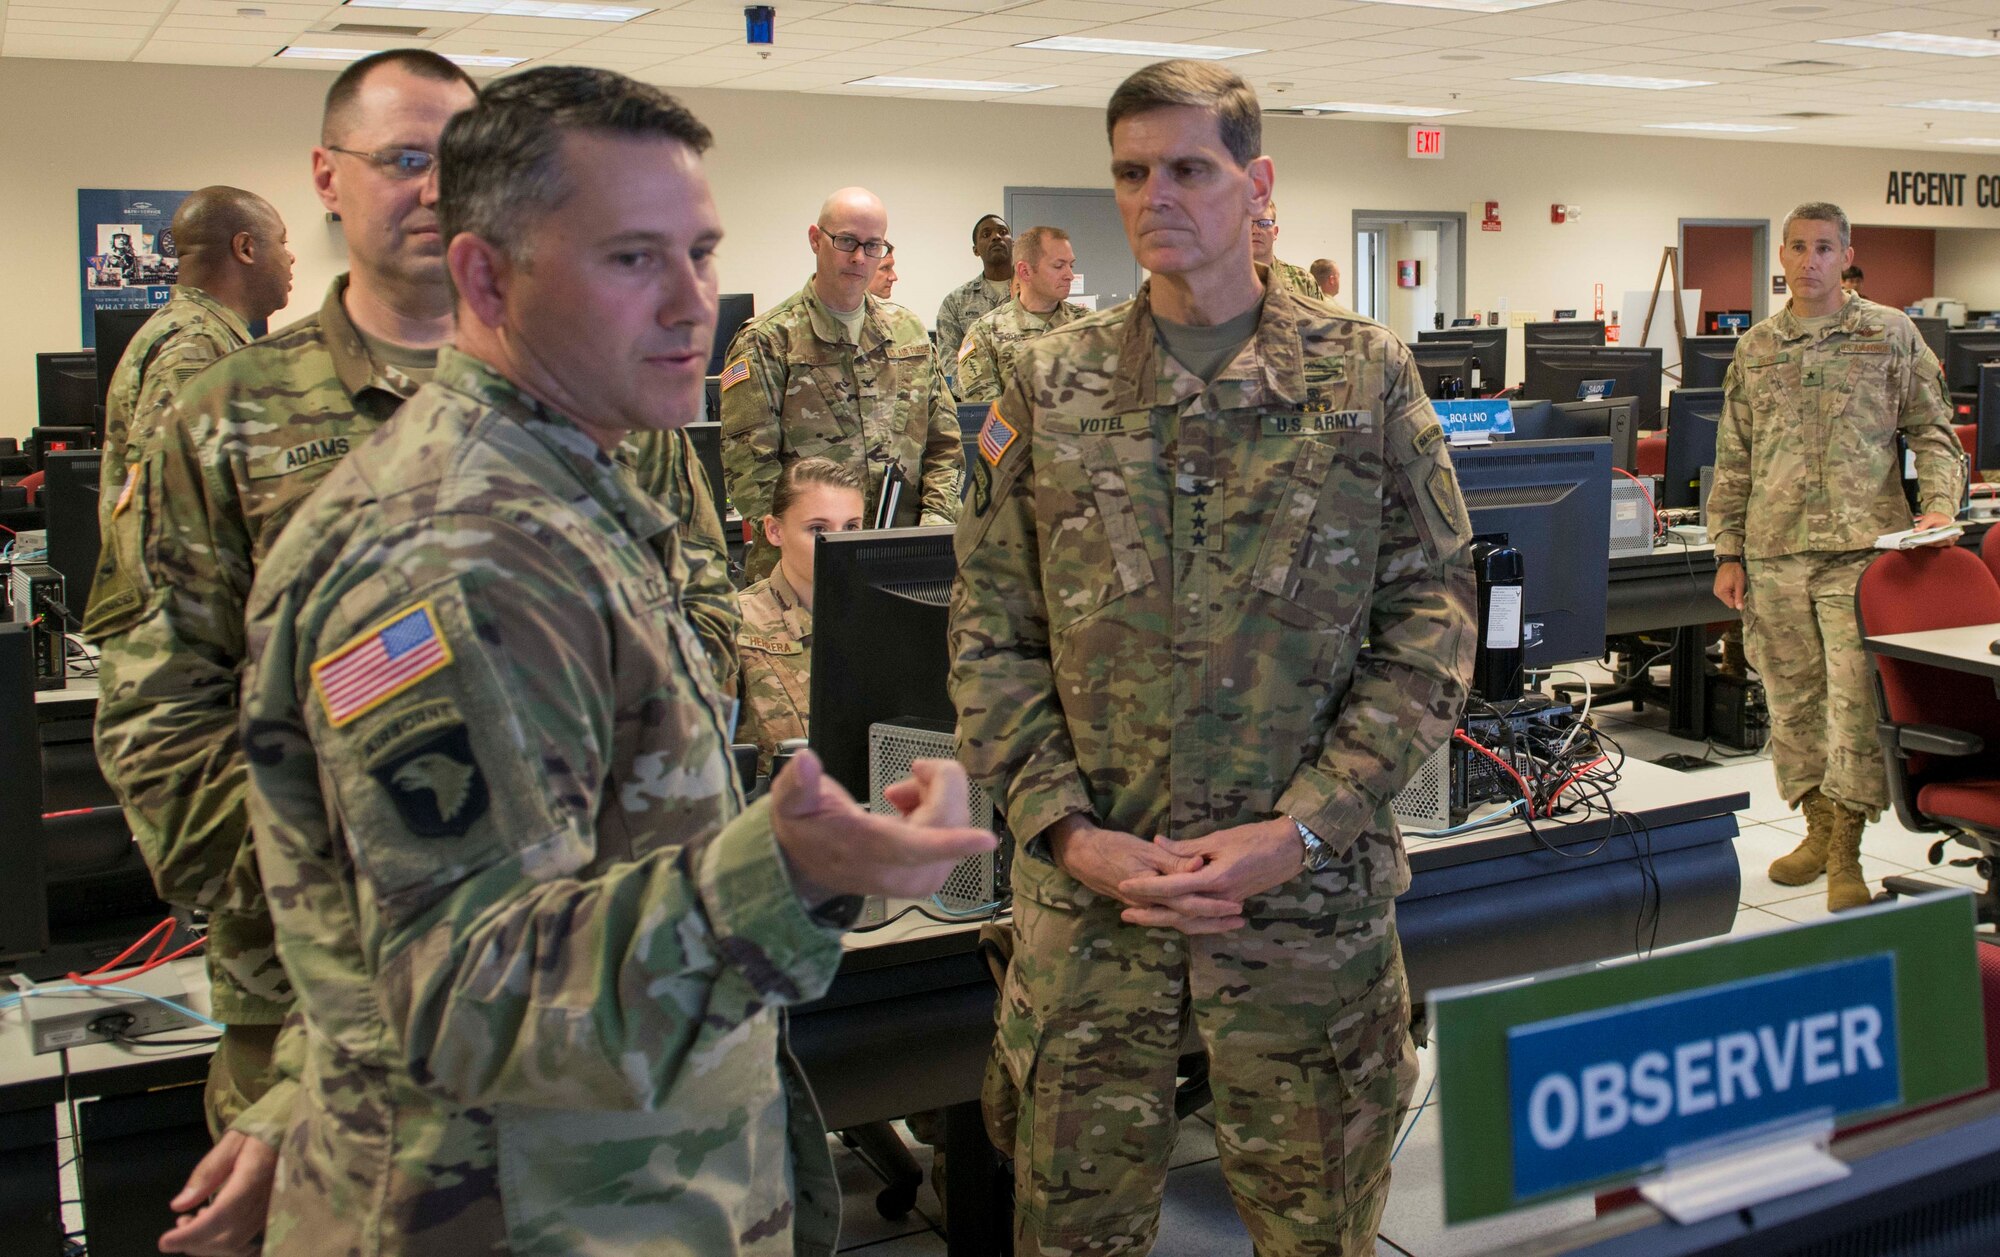 U.S. Army Gen. Joseph L. Votel, United States Central Command commander, listens to a Soldier at Shaw Air Force Base, S.C., June 4, 2018.